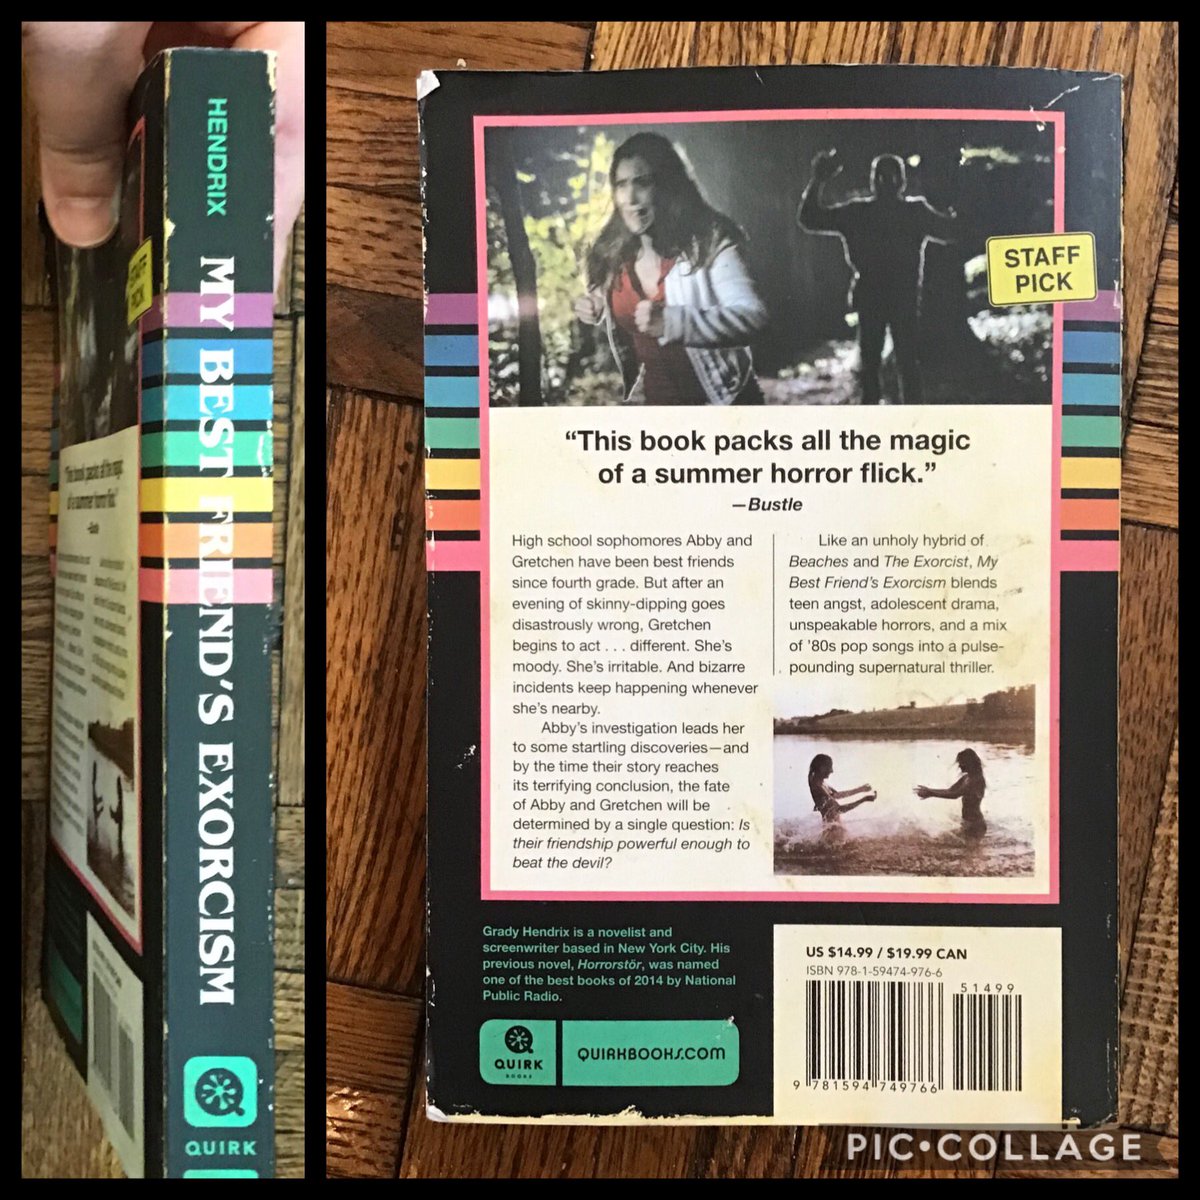 5) My Best Friend’s Exorcism, Grady Hendrix. Quirk Books. Cover illus. by Hugh Fleming, design by Doogie Horner. ISBN 978-1-59474-976-6. Fiction.Hendrix is a HERO insisting on cool covers for his books. This one is designed with PRINTED WEAR to look like an old VHS tape. RAD!!